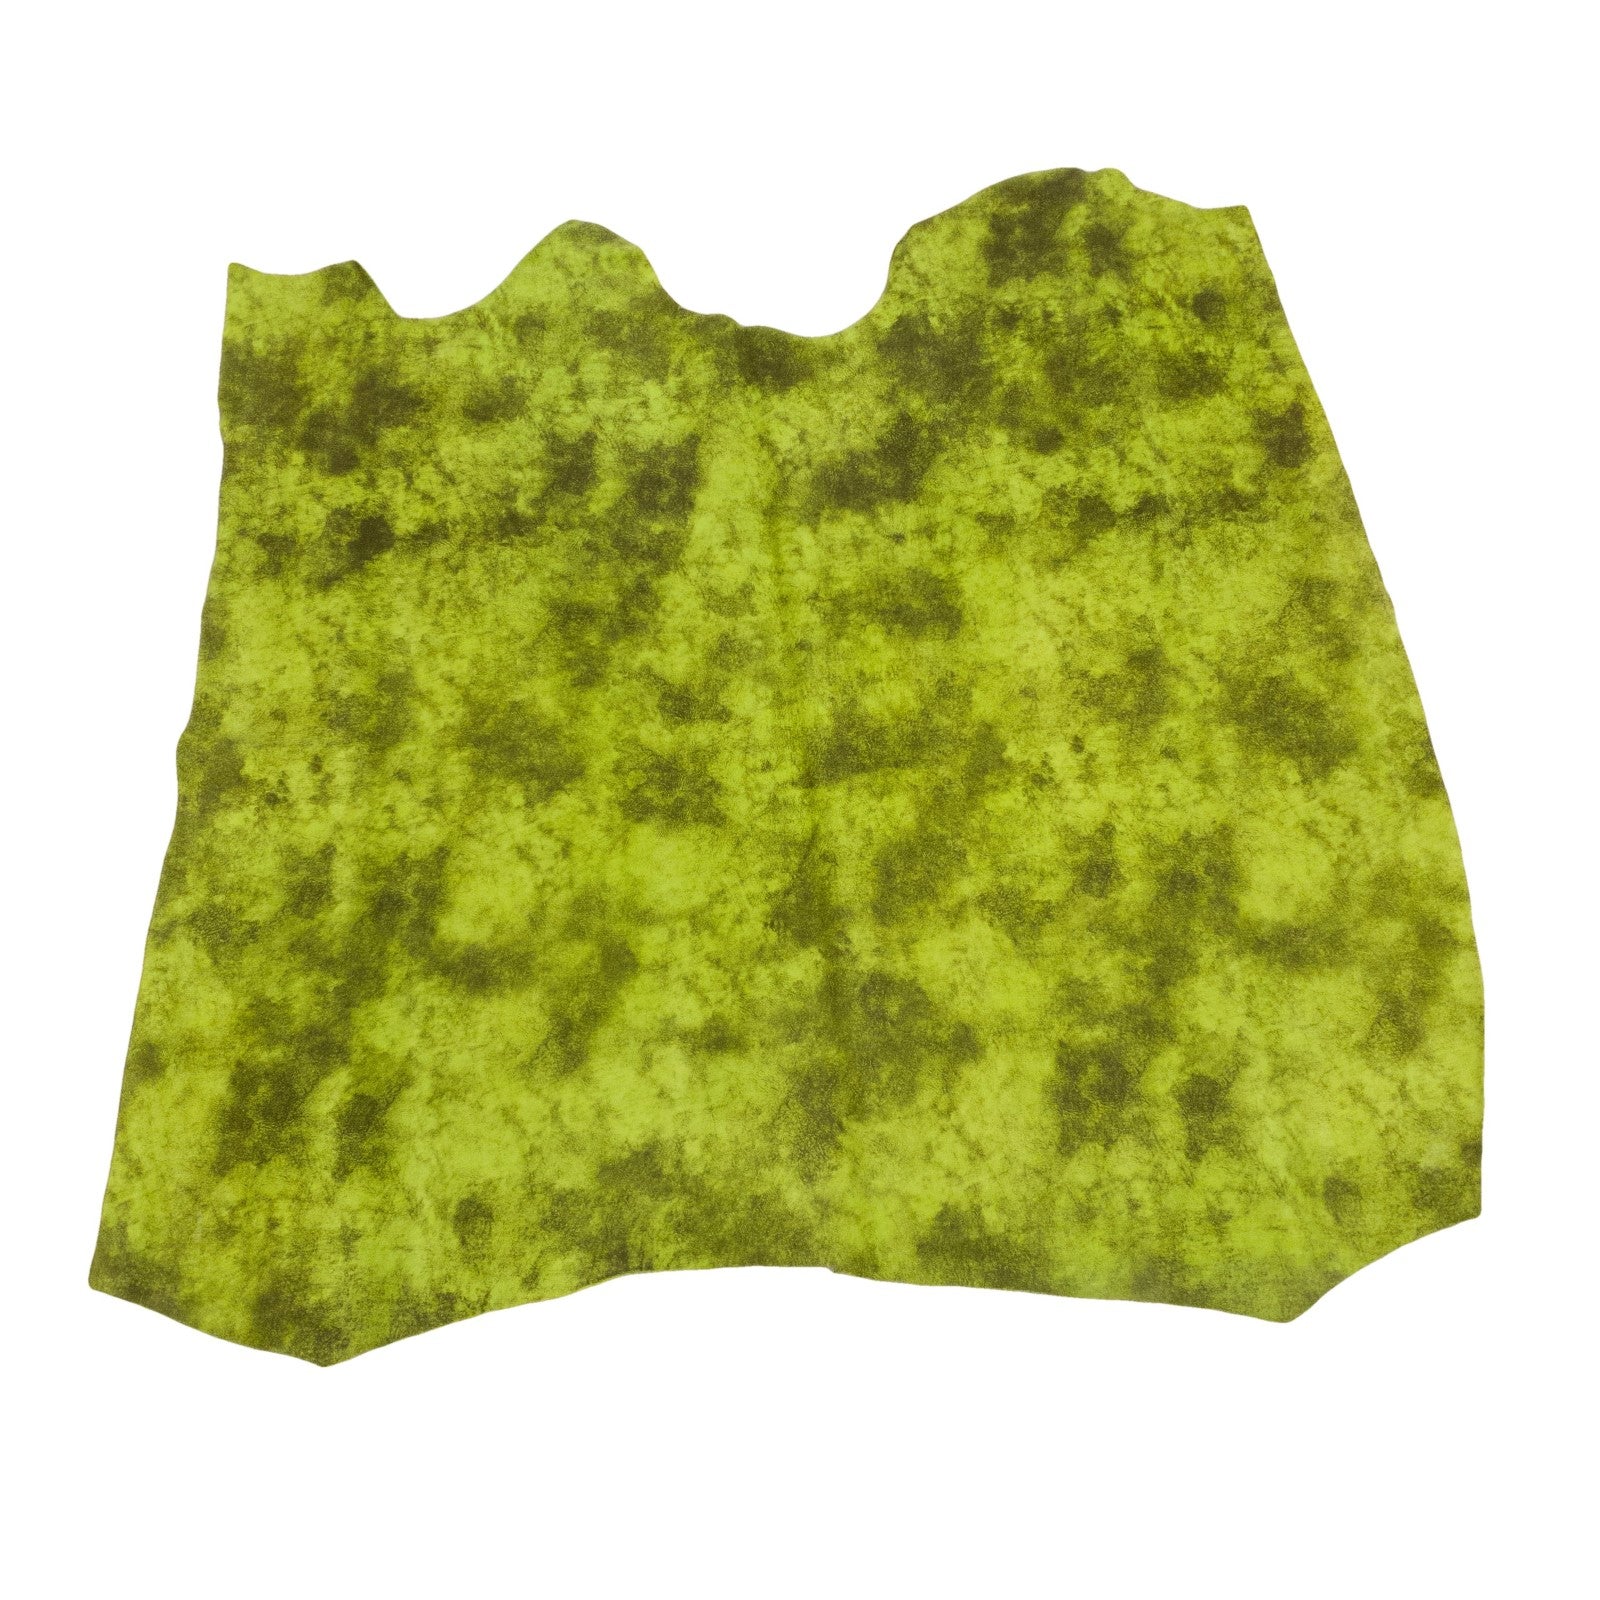 Scuba Suede, 3-4 oz, 8-17 sq ft, Cow Sides, Green / 15-17 Sq Ft | The Leather Guy